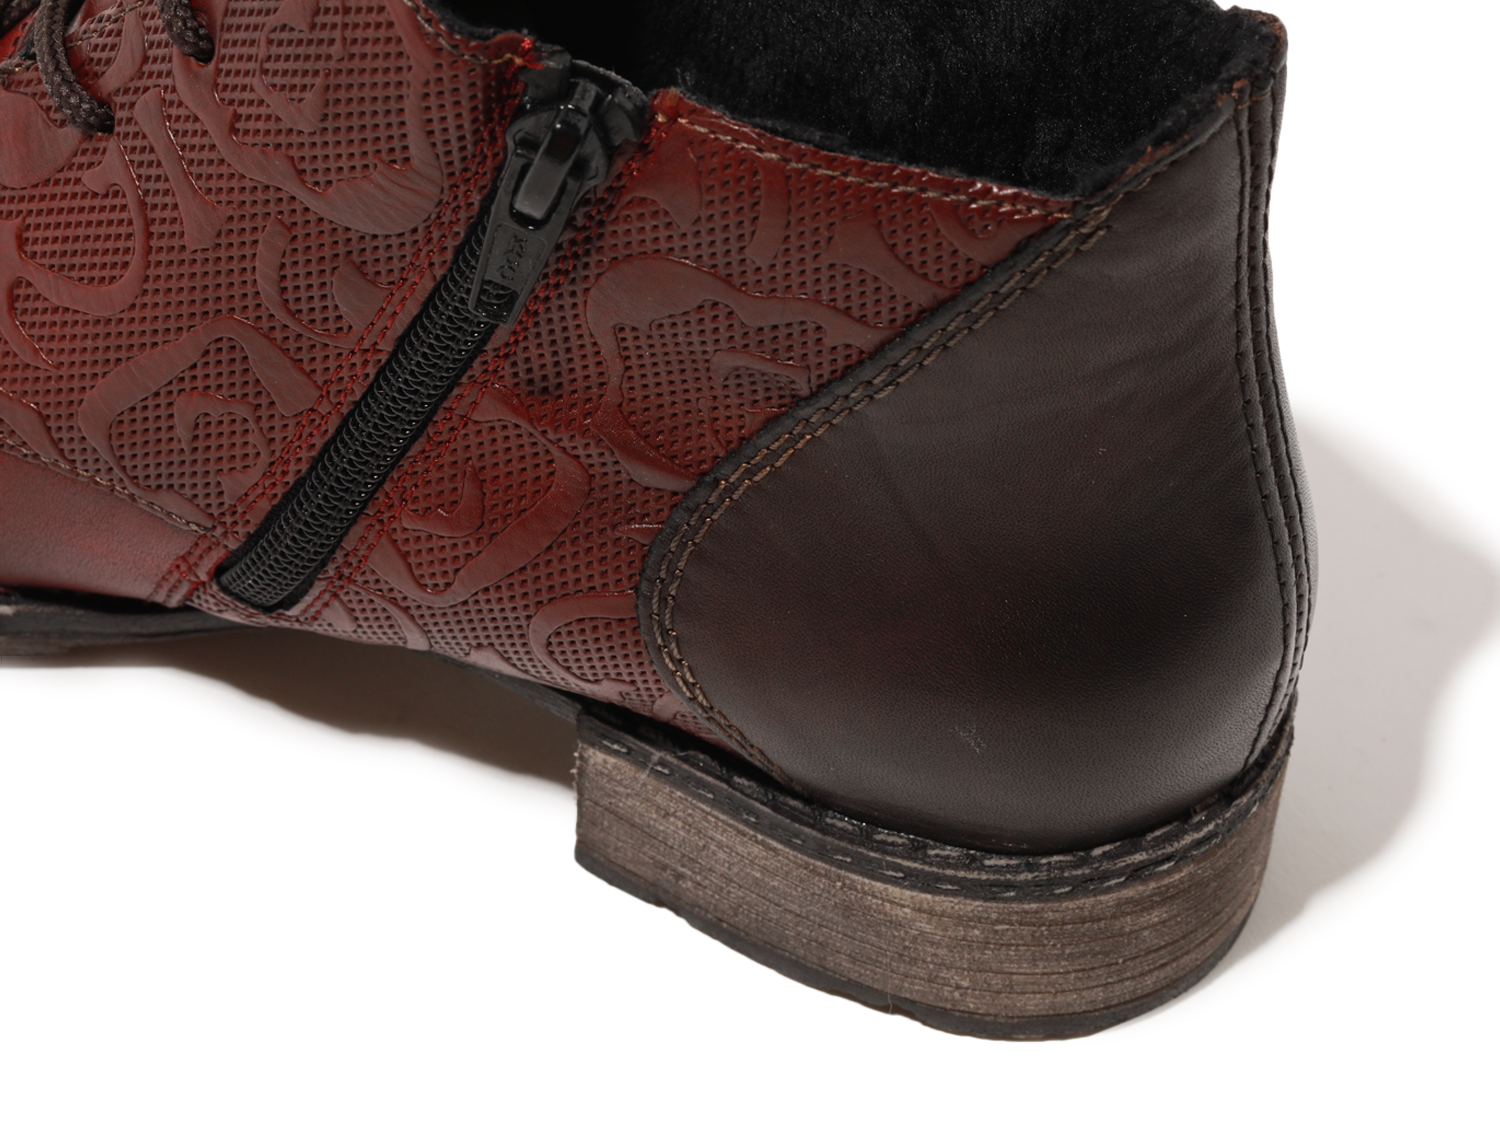 Details about   Remonte Chandra 71 Women's Boot